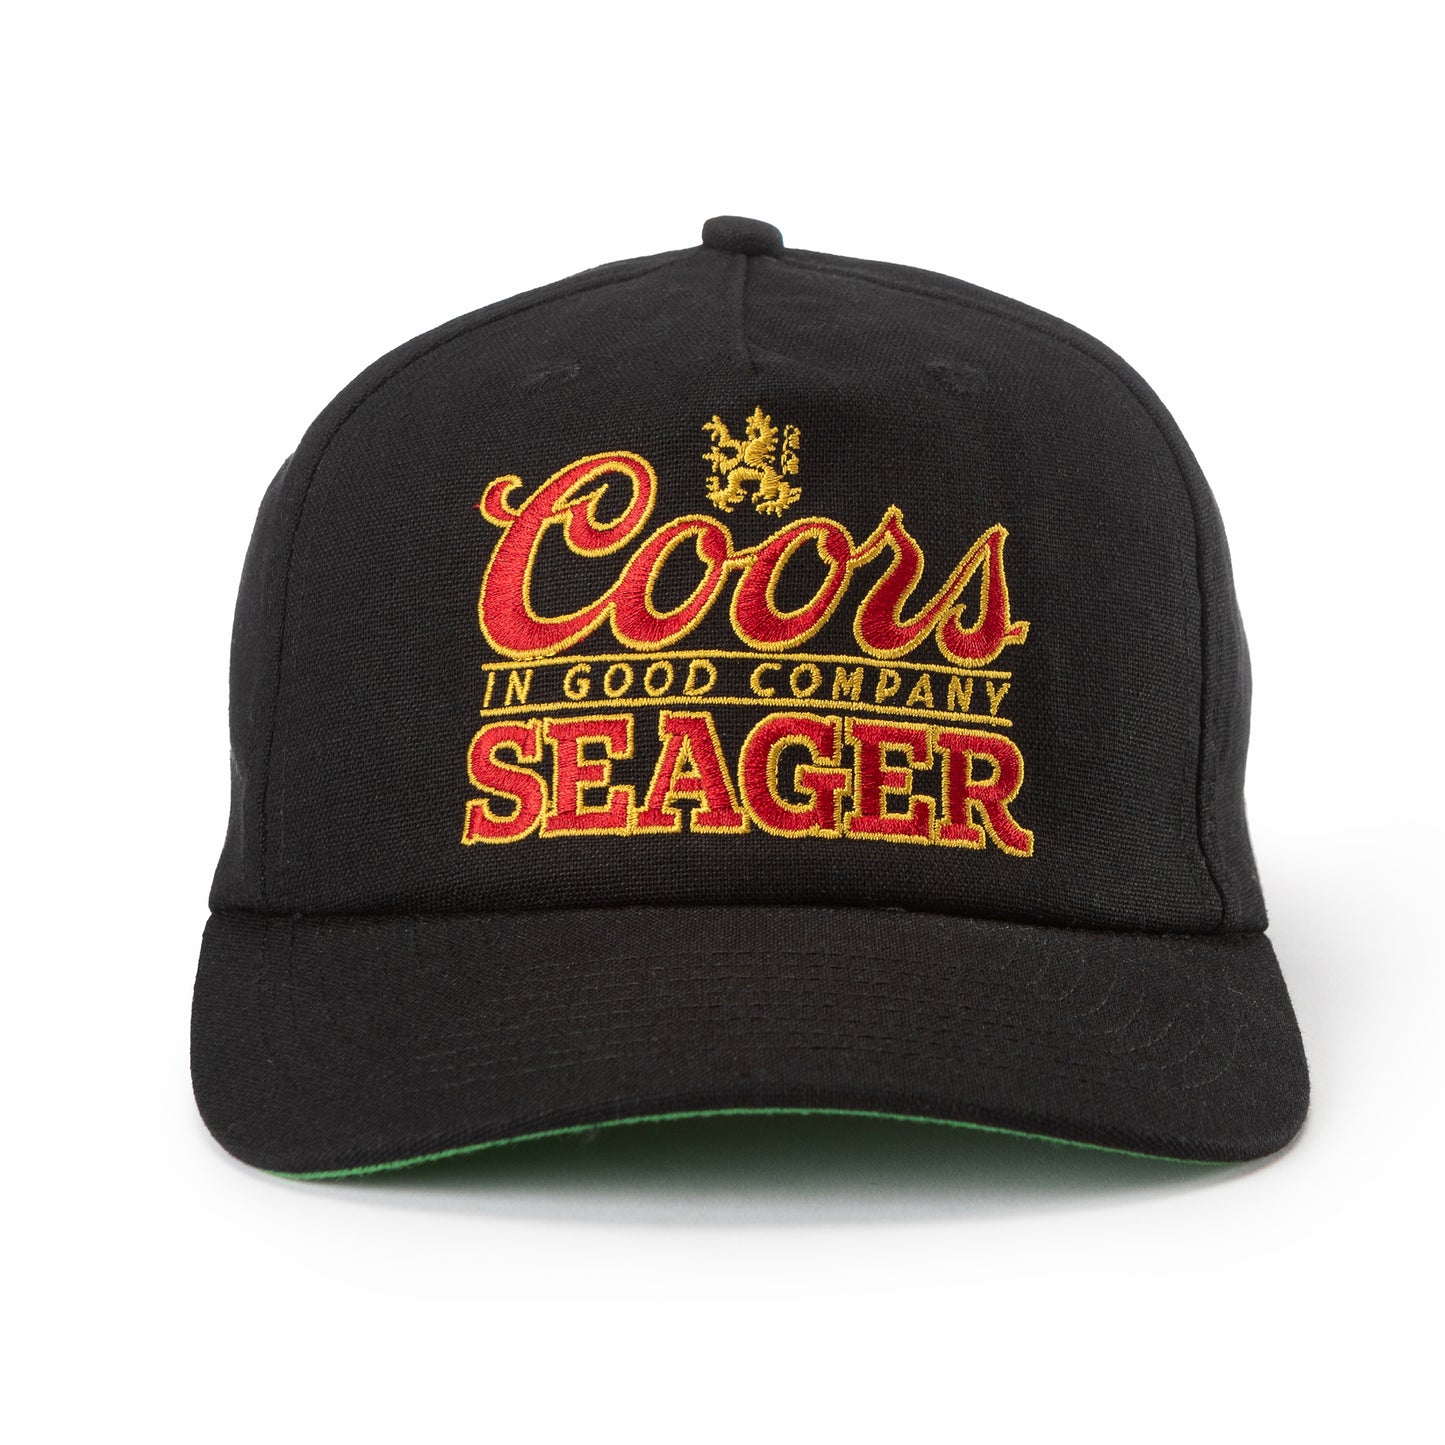 Coors x Seager Snapback